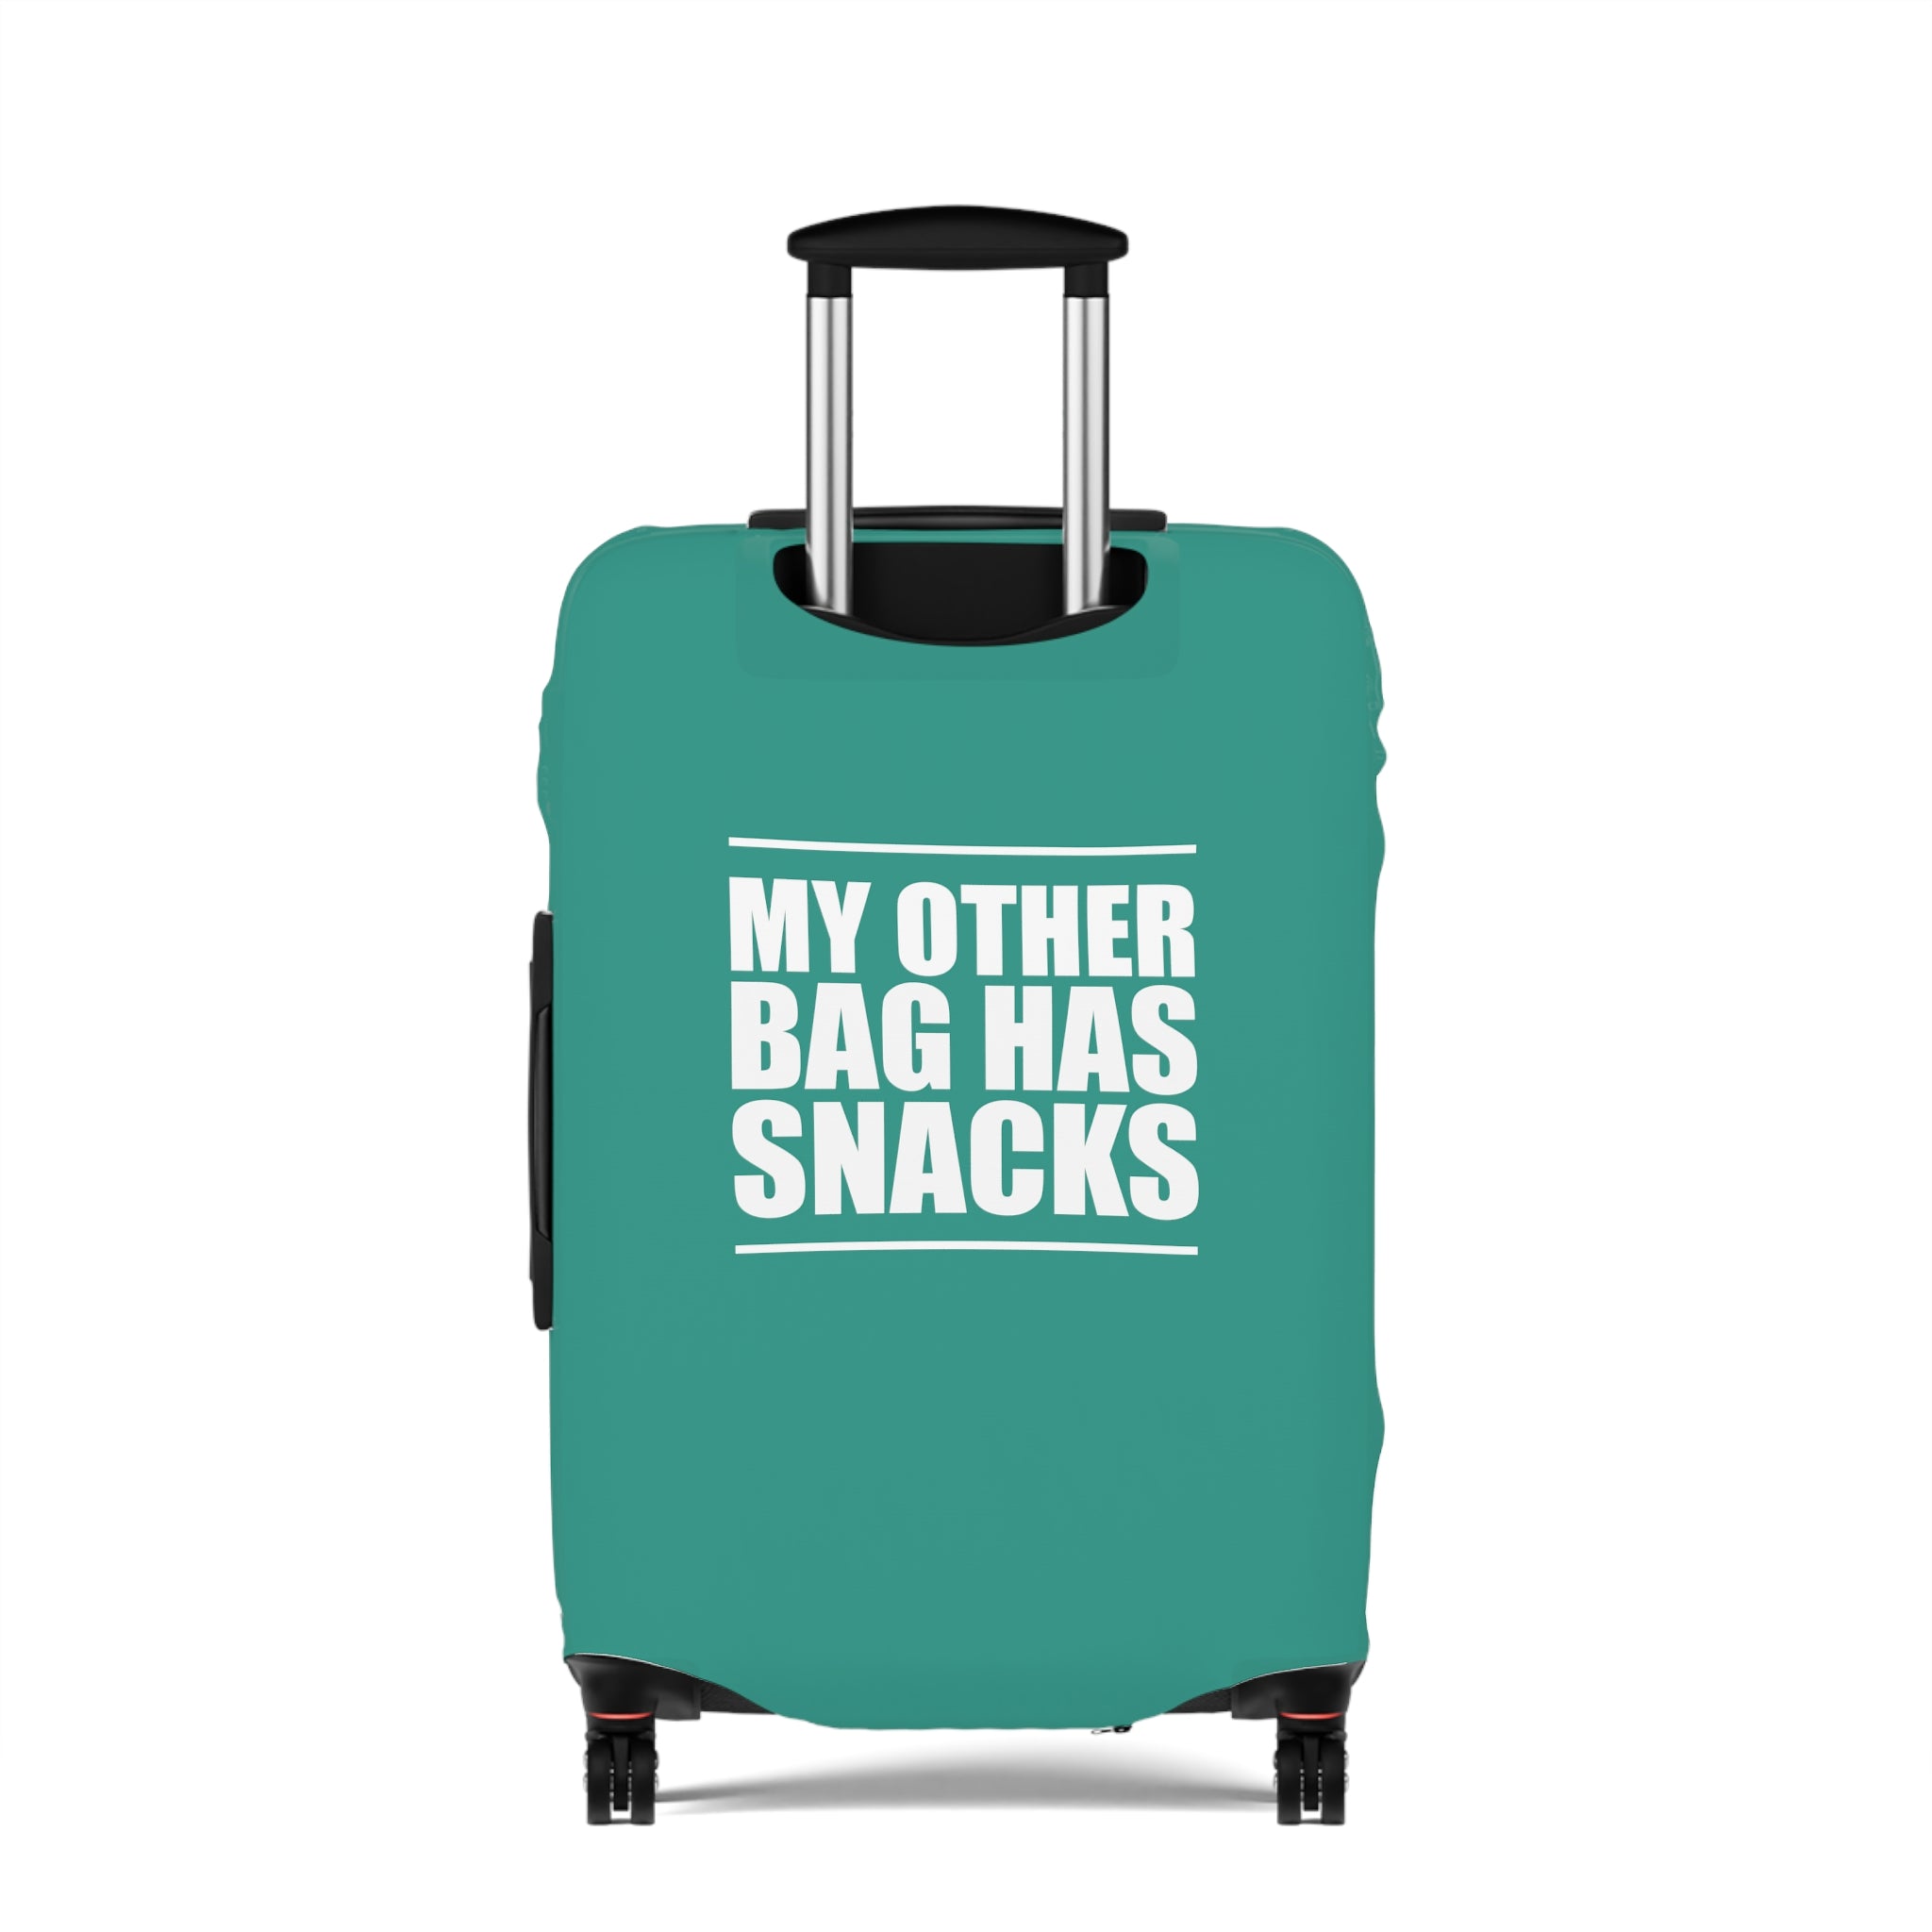 My other bag has snacks Luggage Cover (Green)